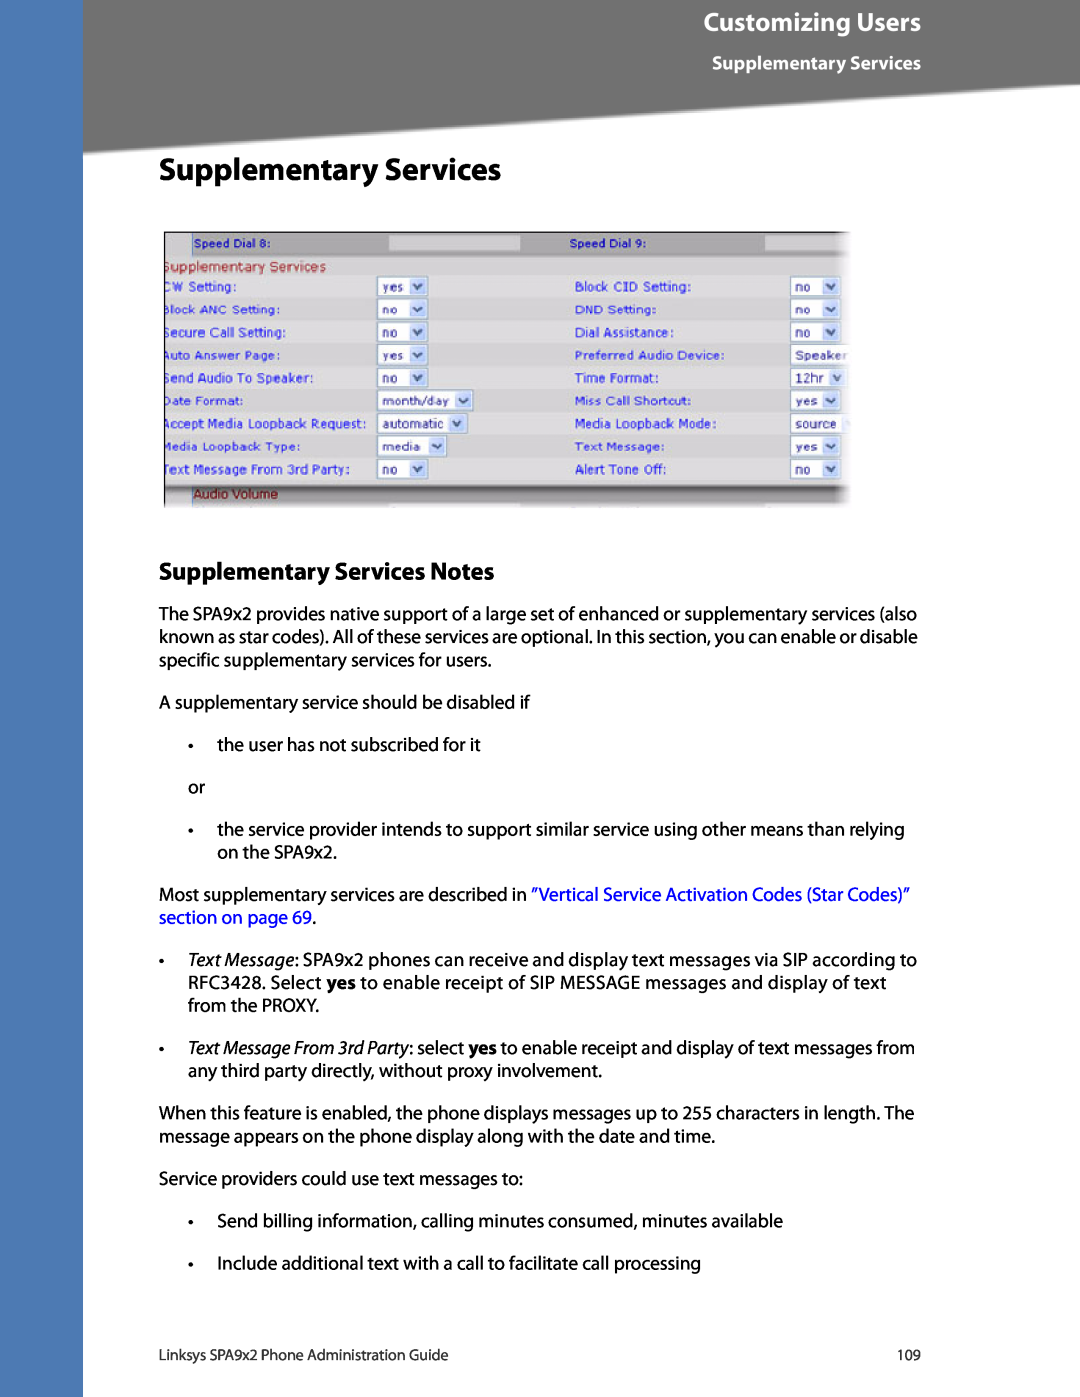 Linksys SPA962, SPA942, SPA932, SPA922 manual Customizing Users, Supplementary Services Notes 